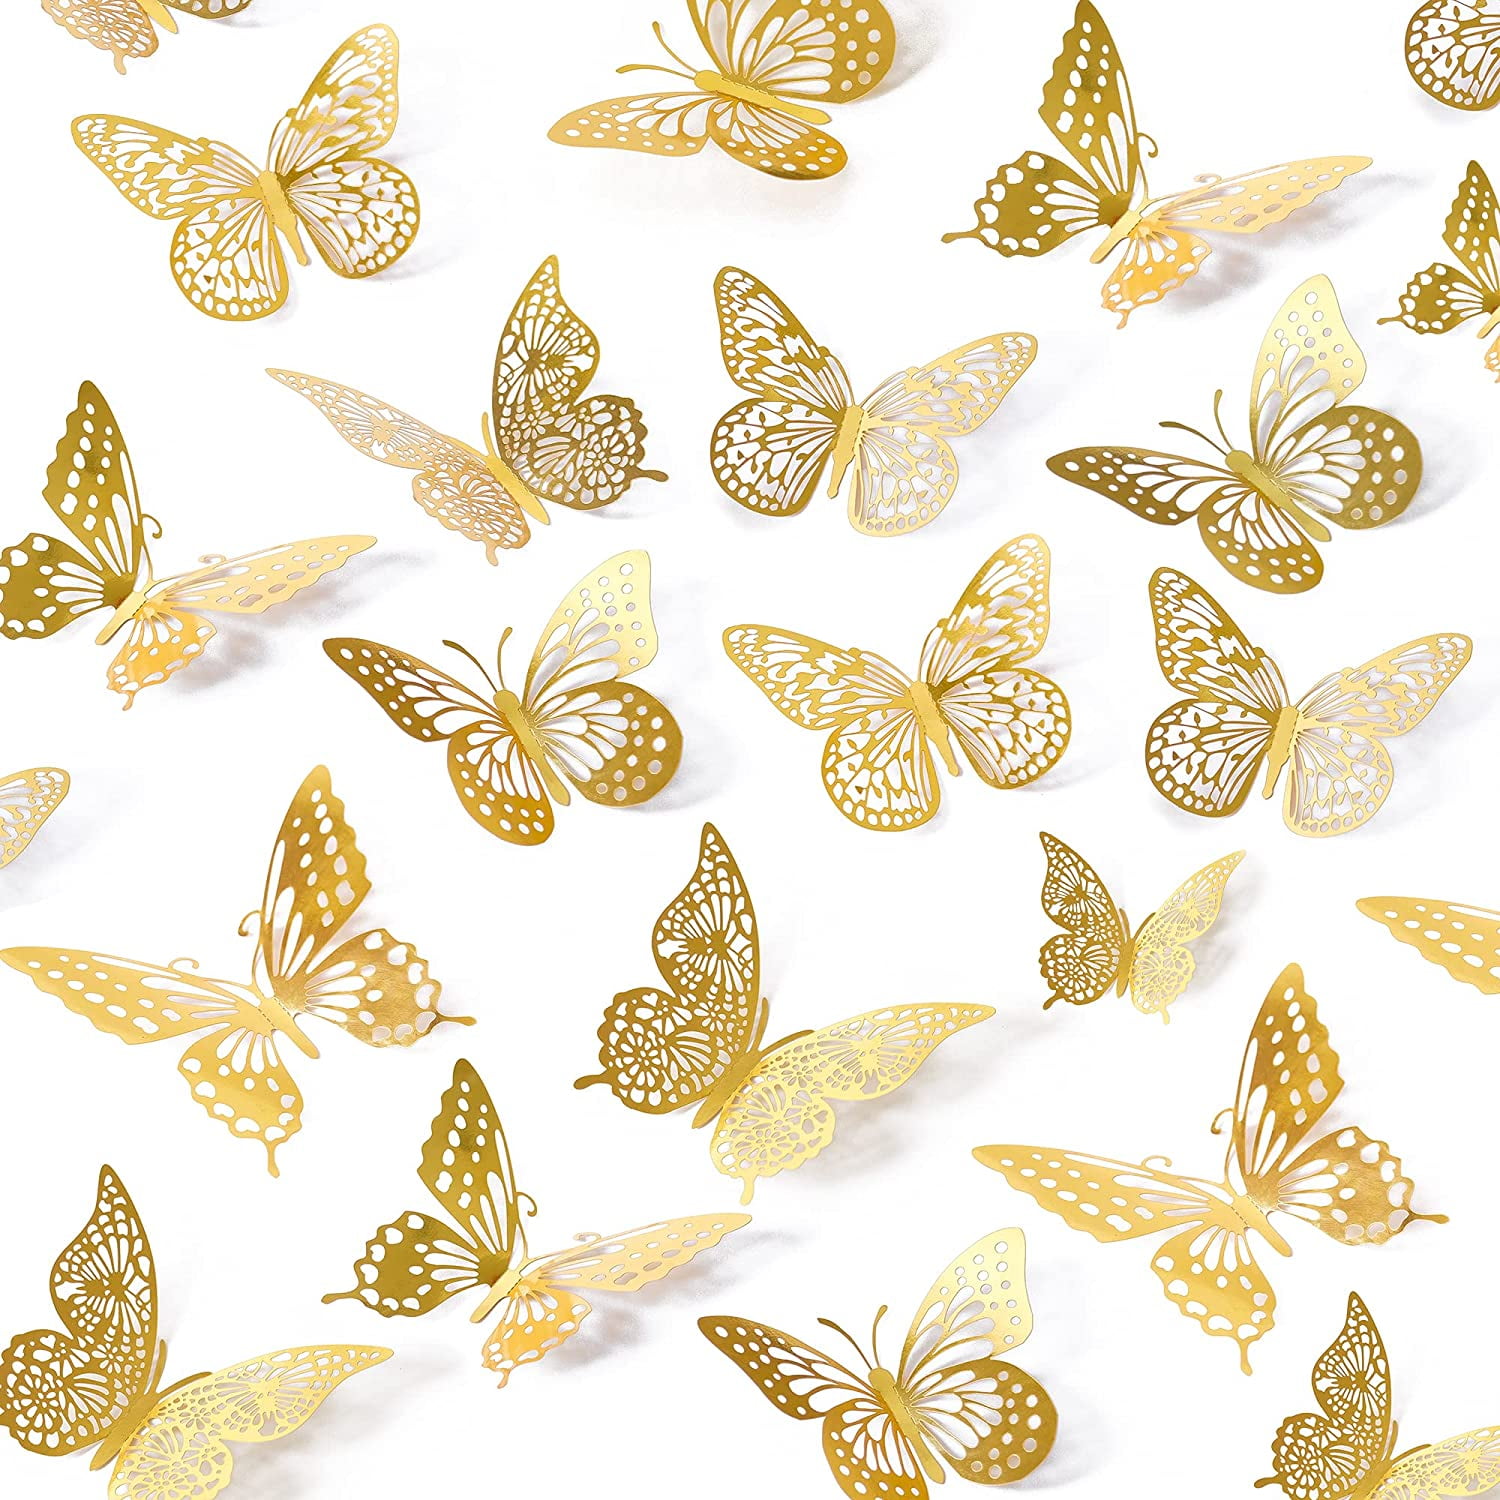 100 Pcs Colorful Butterfly Decals, 3D Butterfly Wall Stickers, Plastic Butterfly Wall Decor for Birthday Party, Wedding, Home Bedroom DIY Crafts